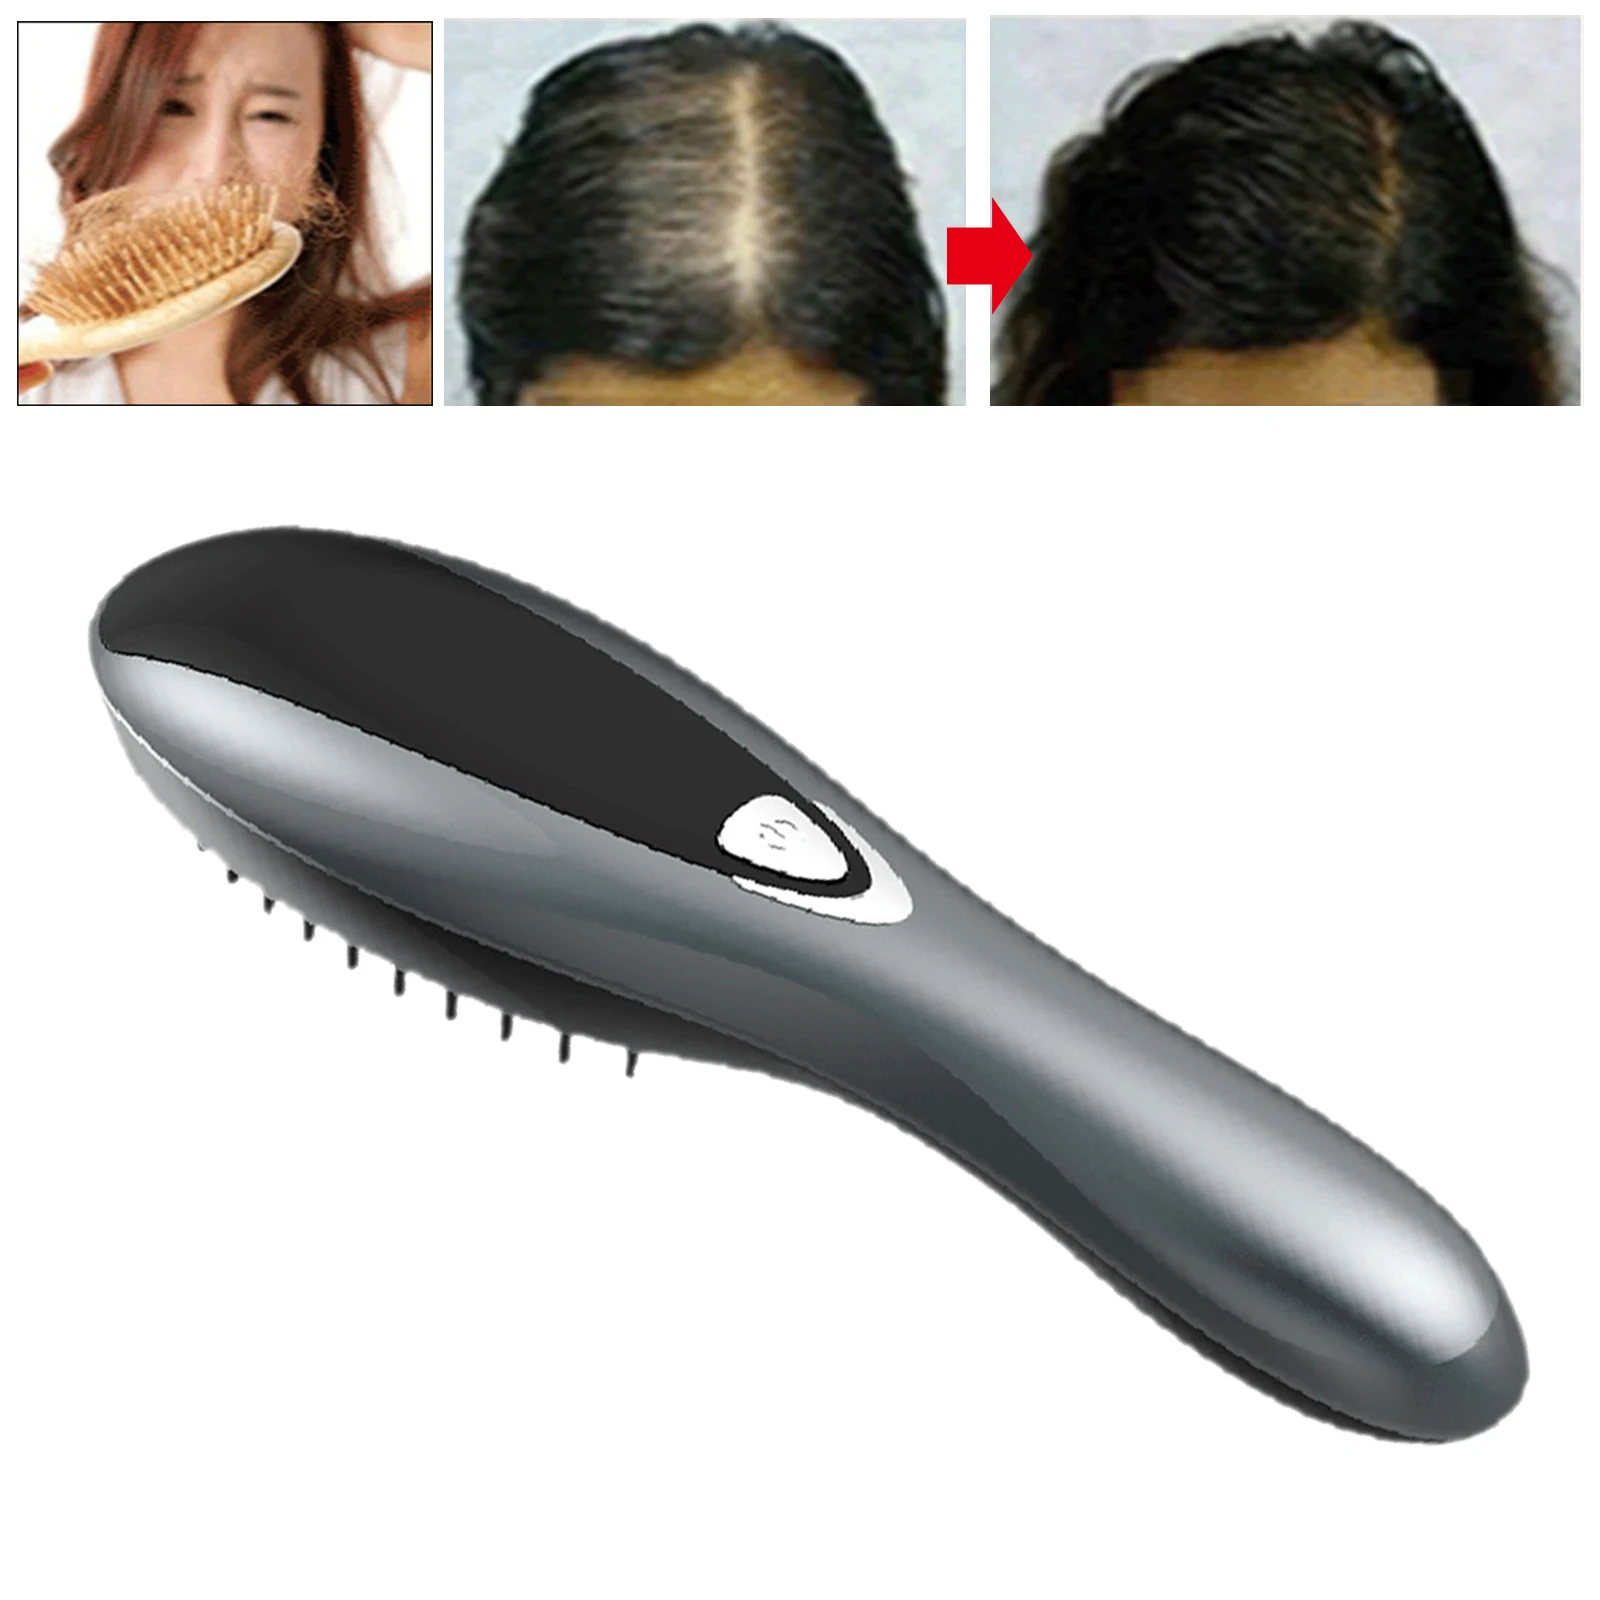 Hair Styling Electric Massage Comb Liquid Guiding Comb Relax for Man Woman Vibrating Hair Growth Brush Hair Car Relief Stress